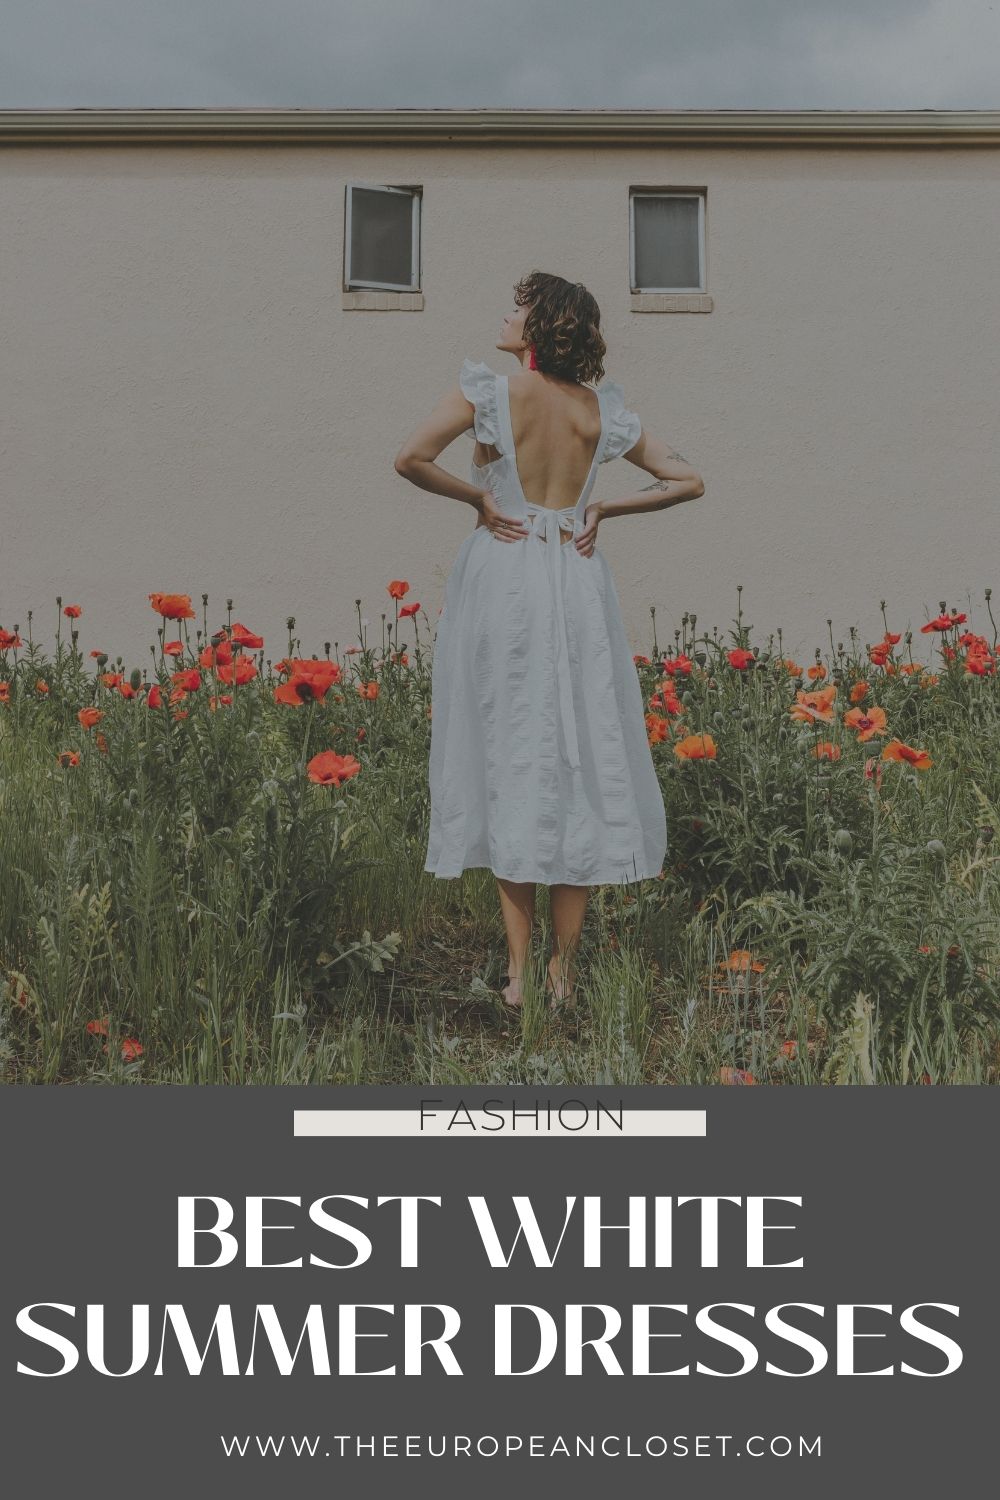 I've got you covered if you're looking for the best white Summer dresses to wear when the weather is super hot.